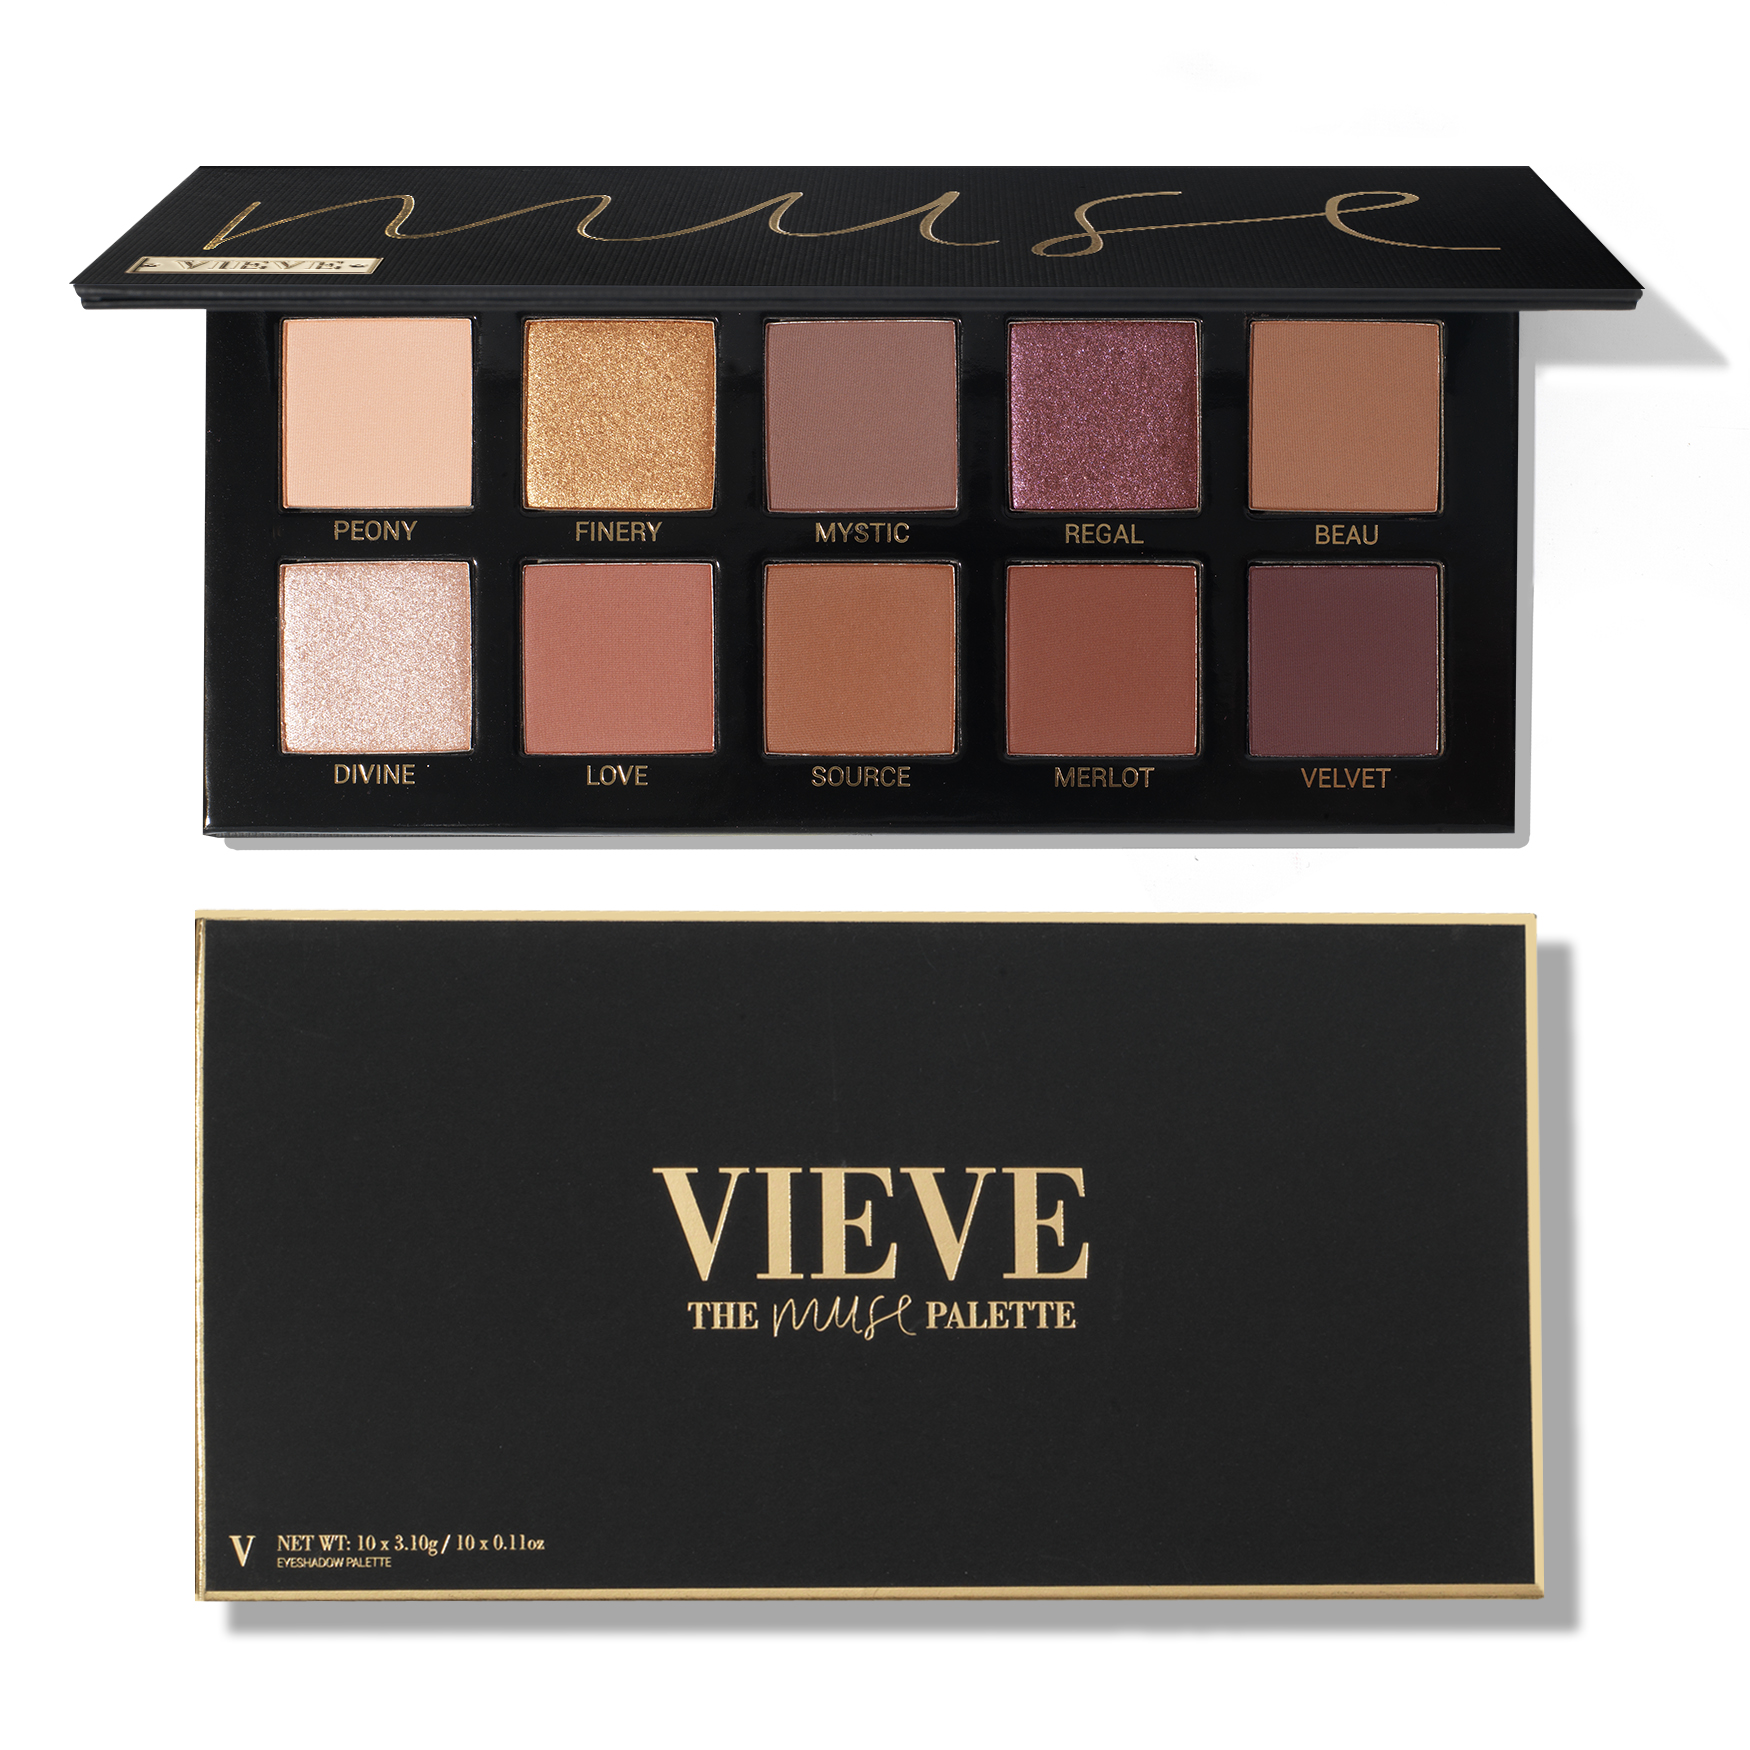 VIEVE The Muse Palette | Space NK